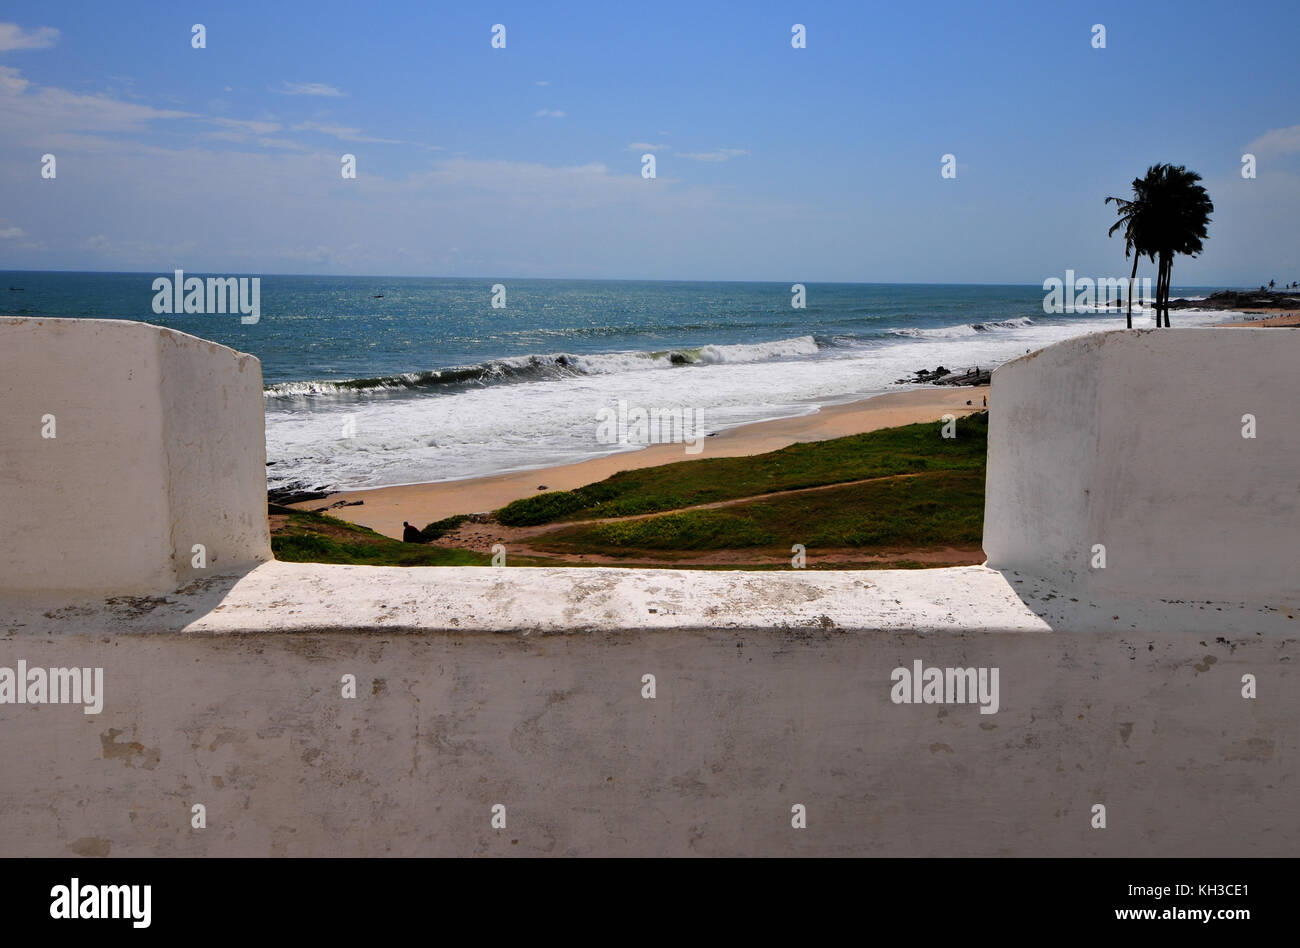 Elmina Castle (also called the Castle of St. George) is located on the Atlantic coast of Ghana west of the capital, Accra. It is part of the UNESCO Wo Stock Photo